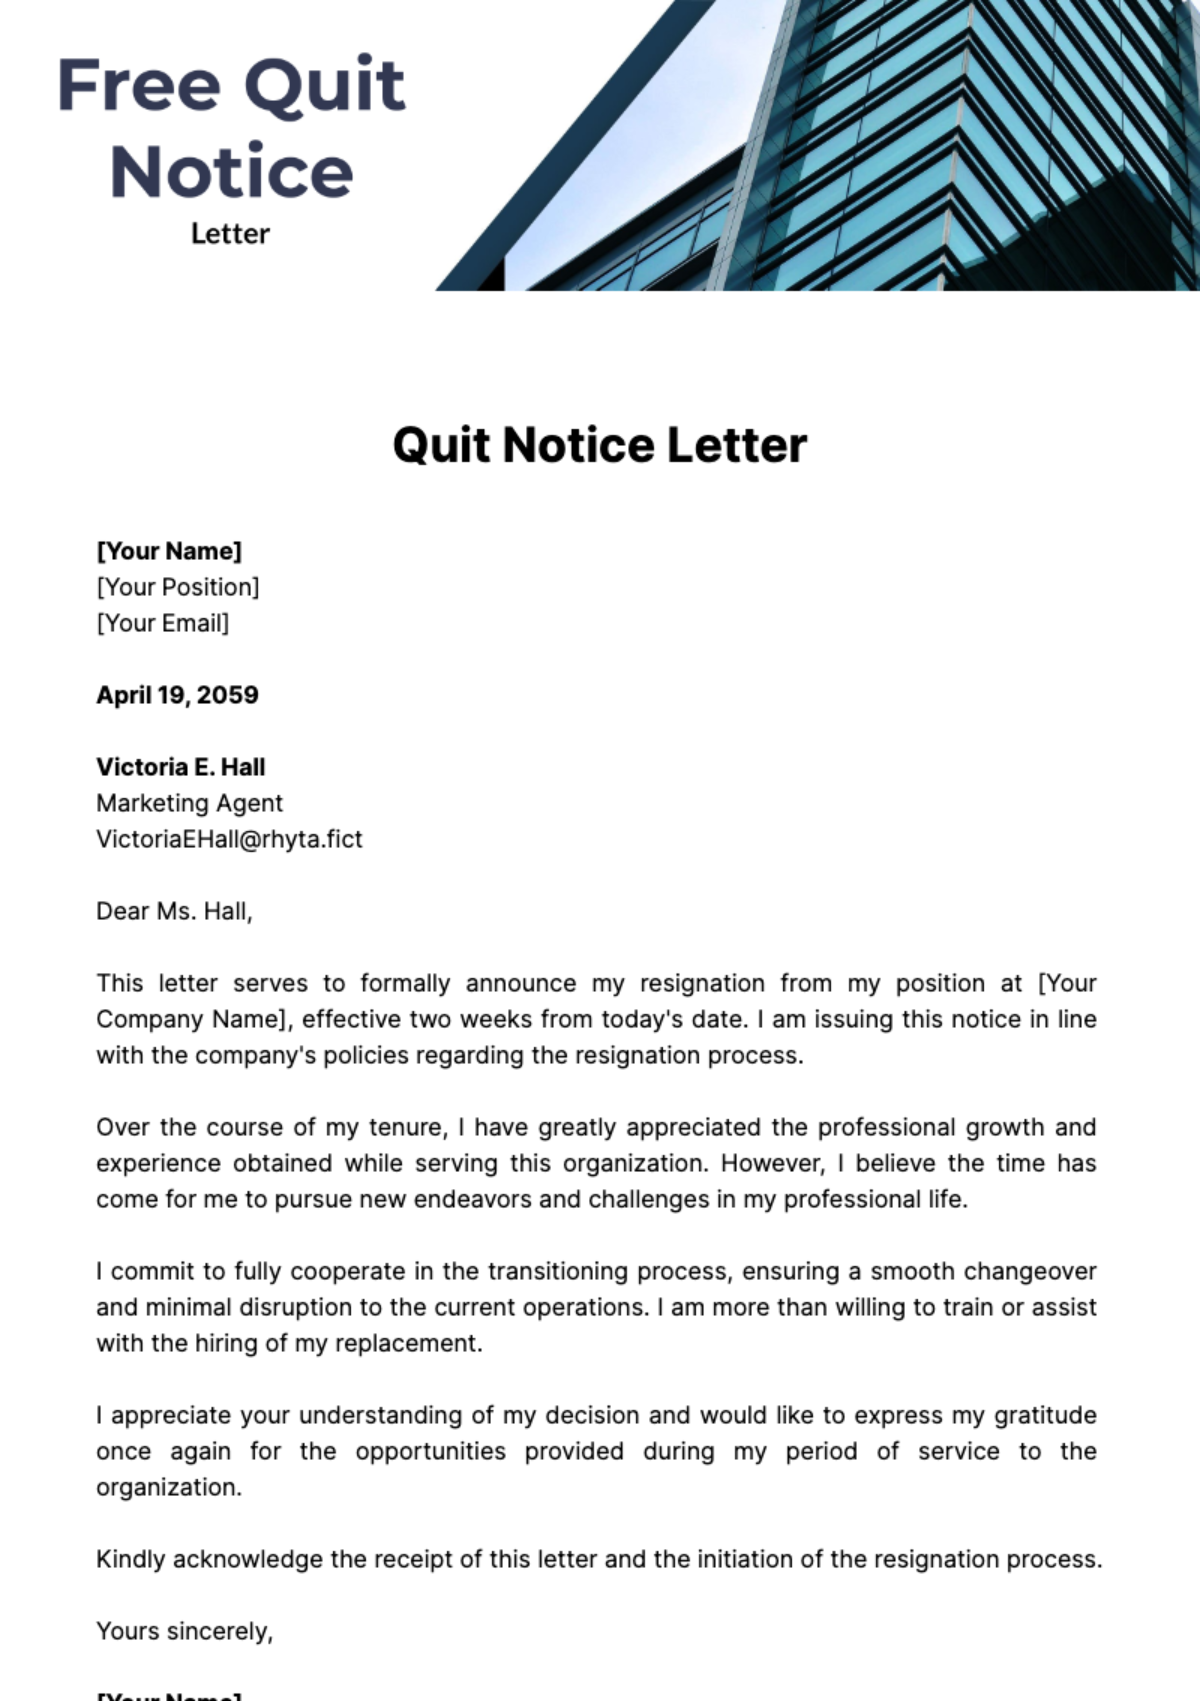 Free Quit Notice Letter Template